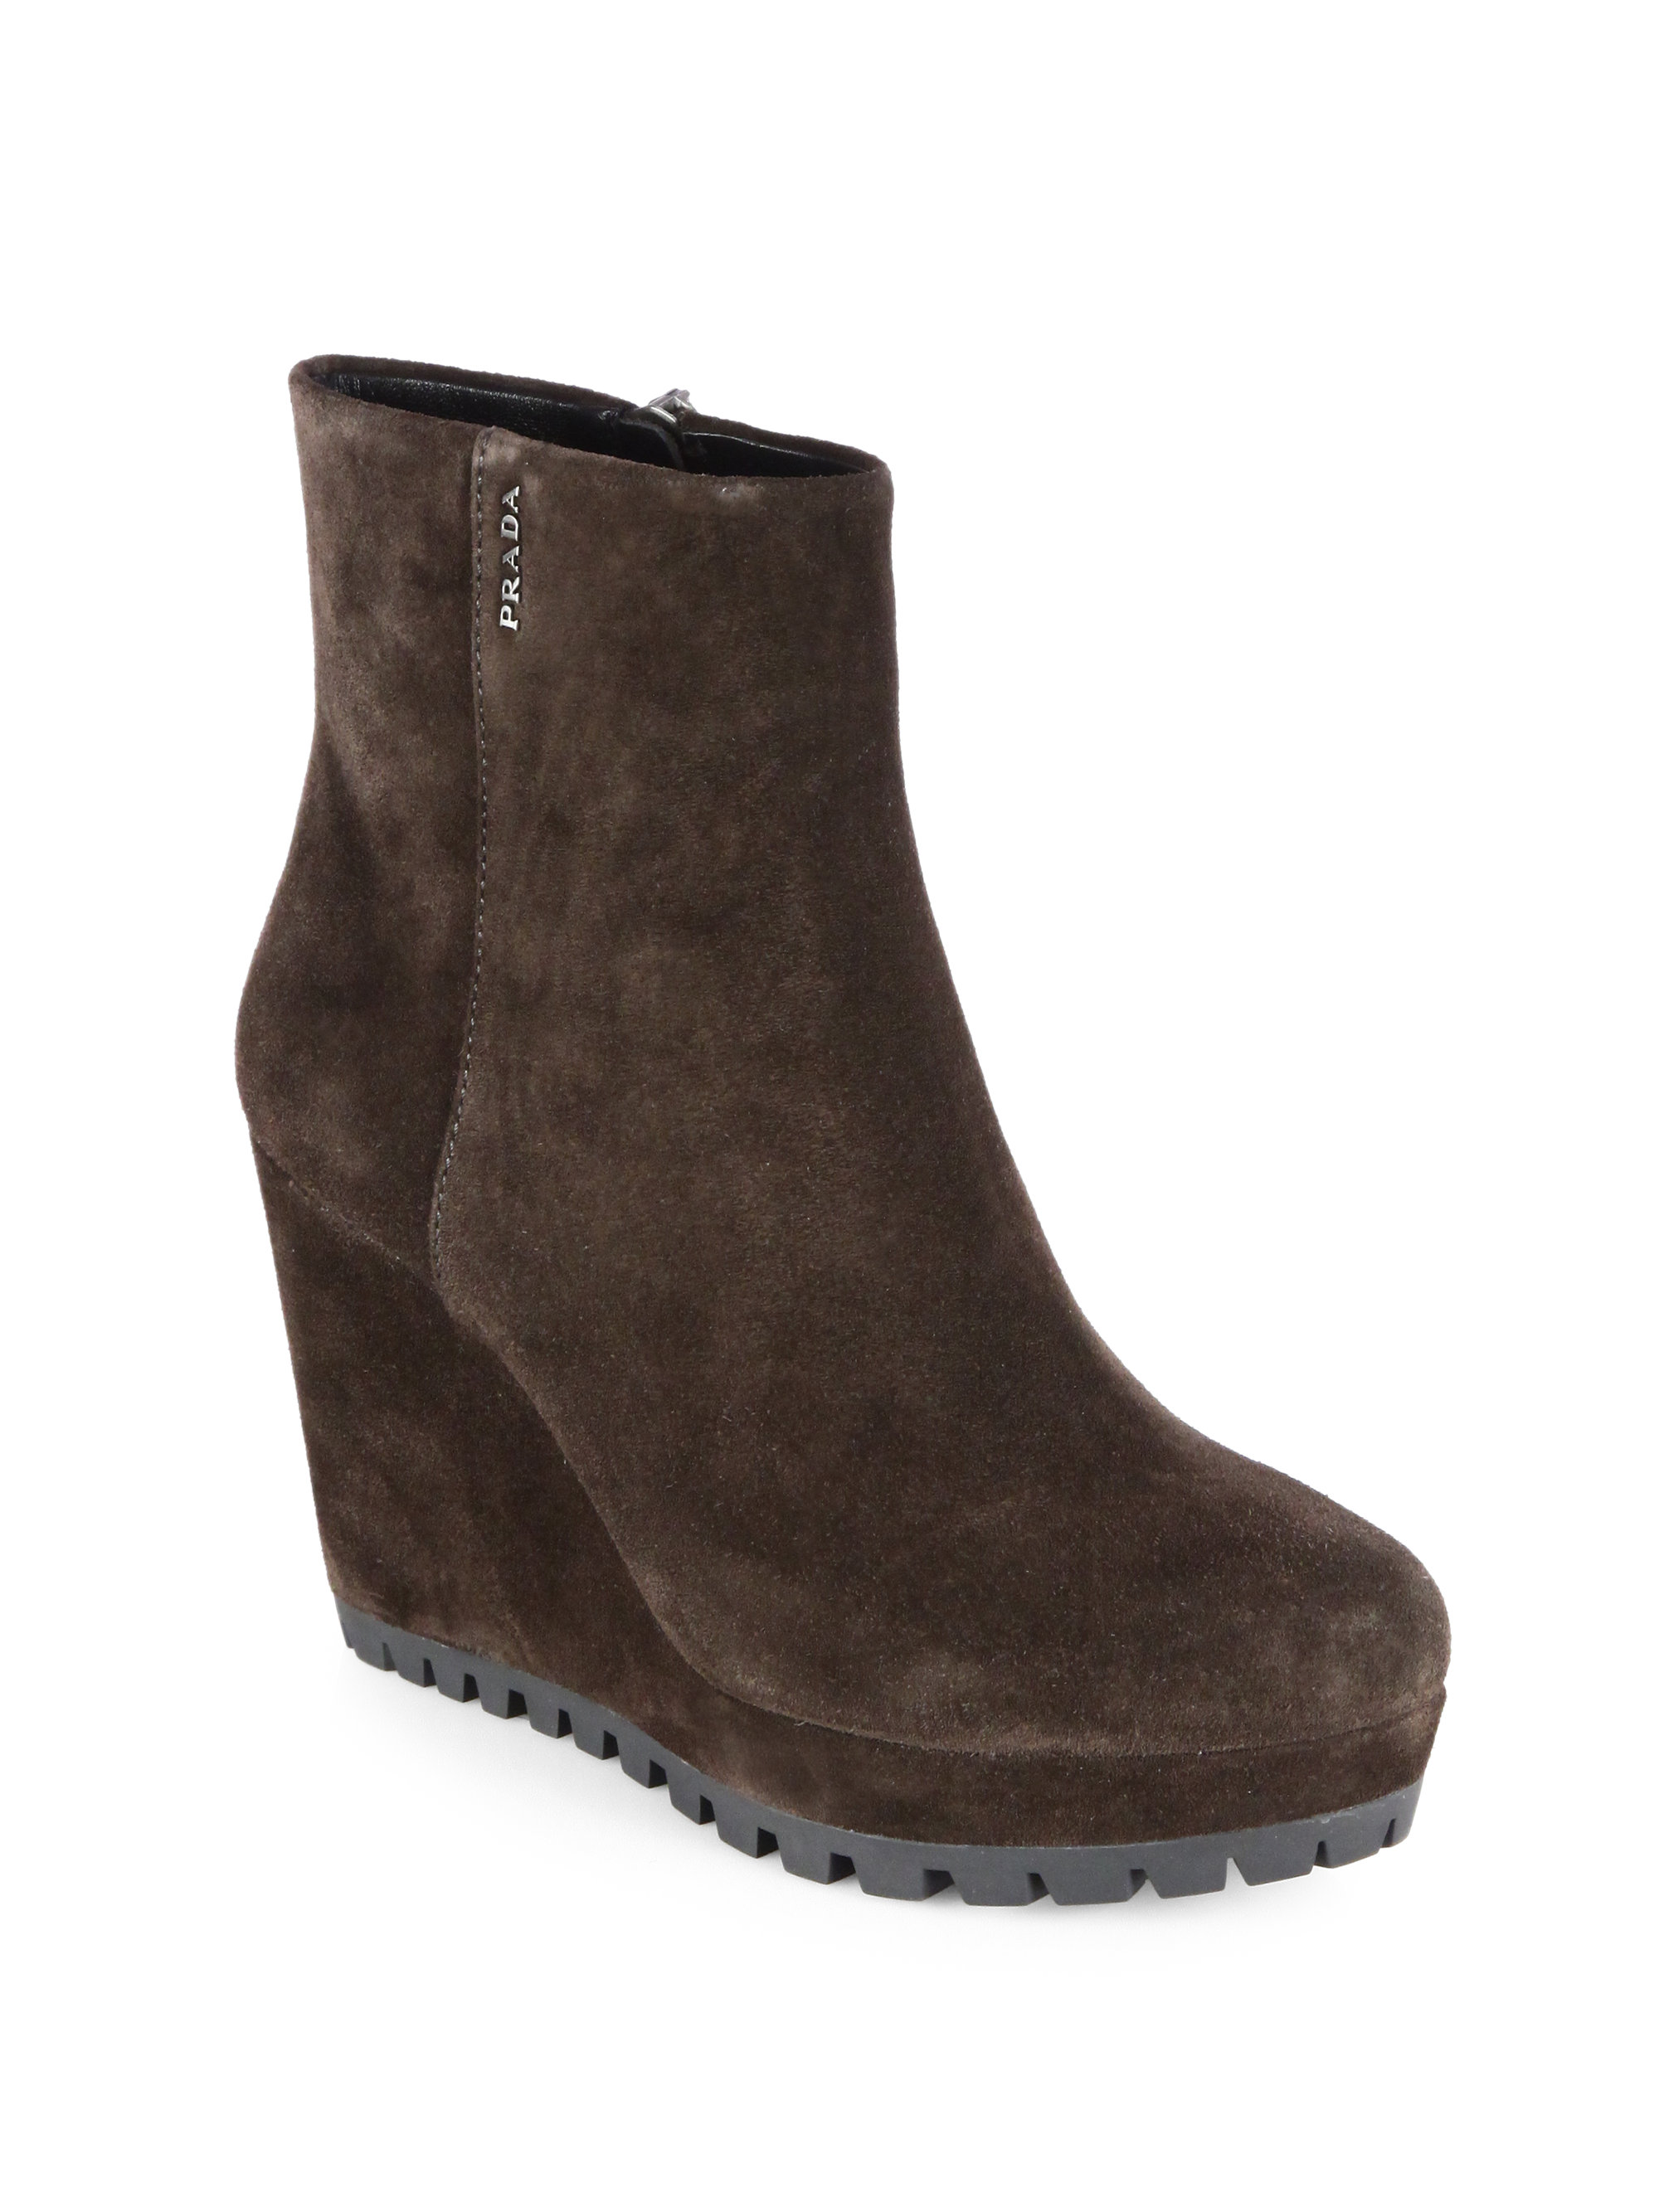 Prada Suede Wedge Ankle Boots in Brown | Lyst